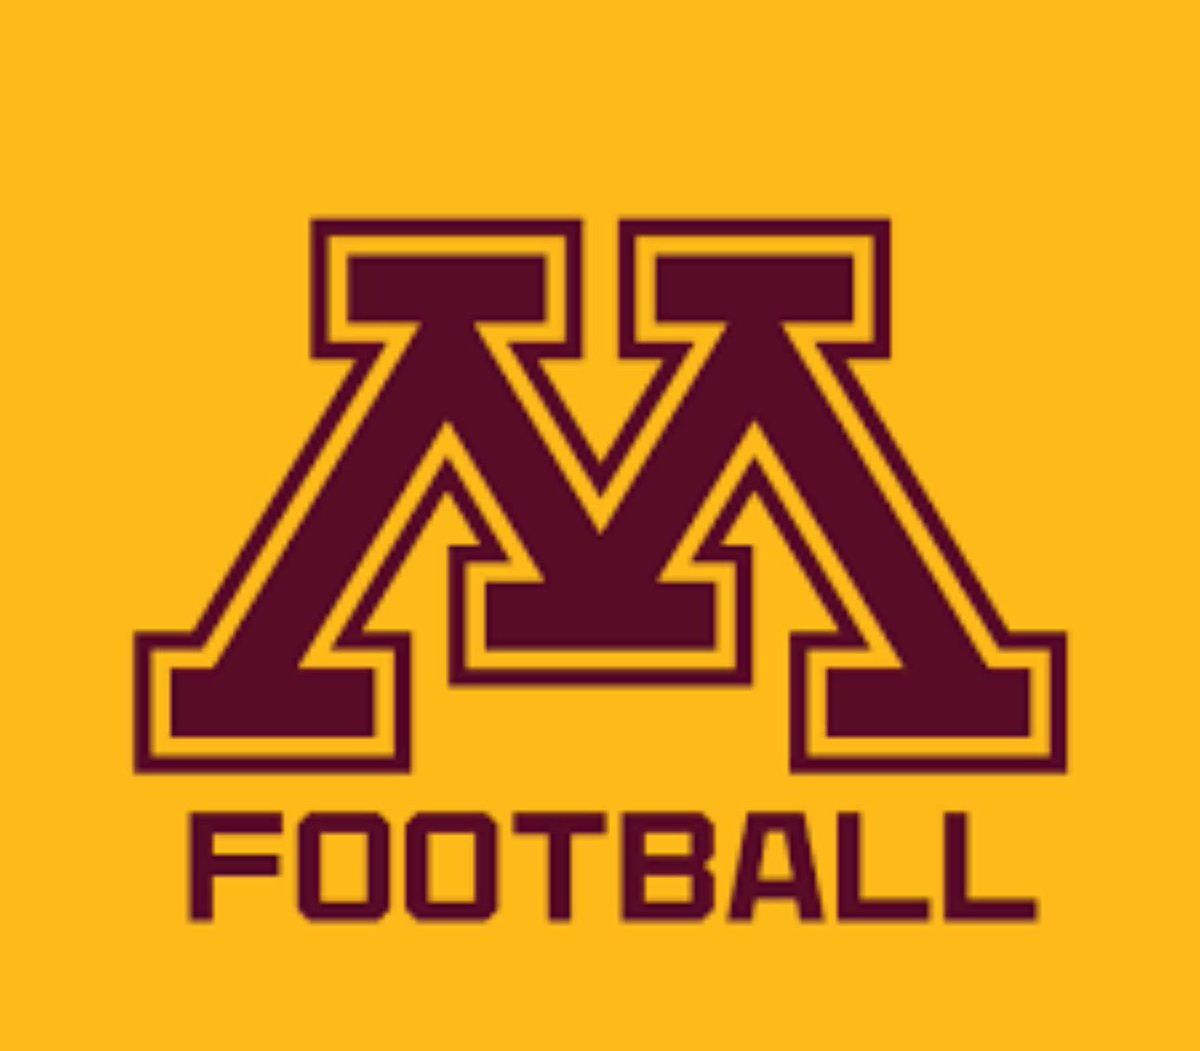 After a great talk with @Callybrian I’m blessed to receive a offer from the. University of Minnesota @GopherFootball @DerbyRecruit @6starfootballKS @PIAthletes @CoachBain75